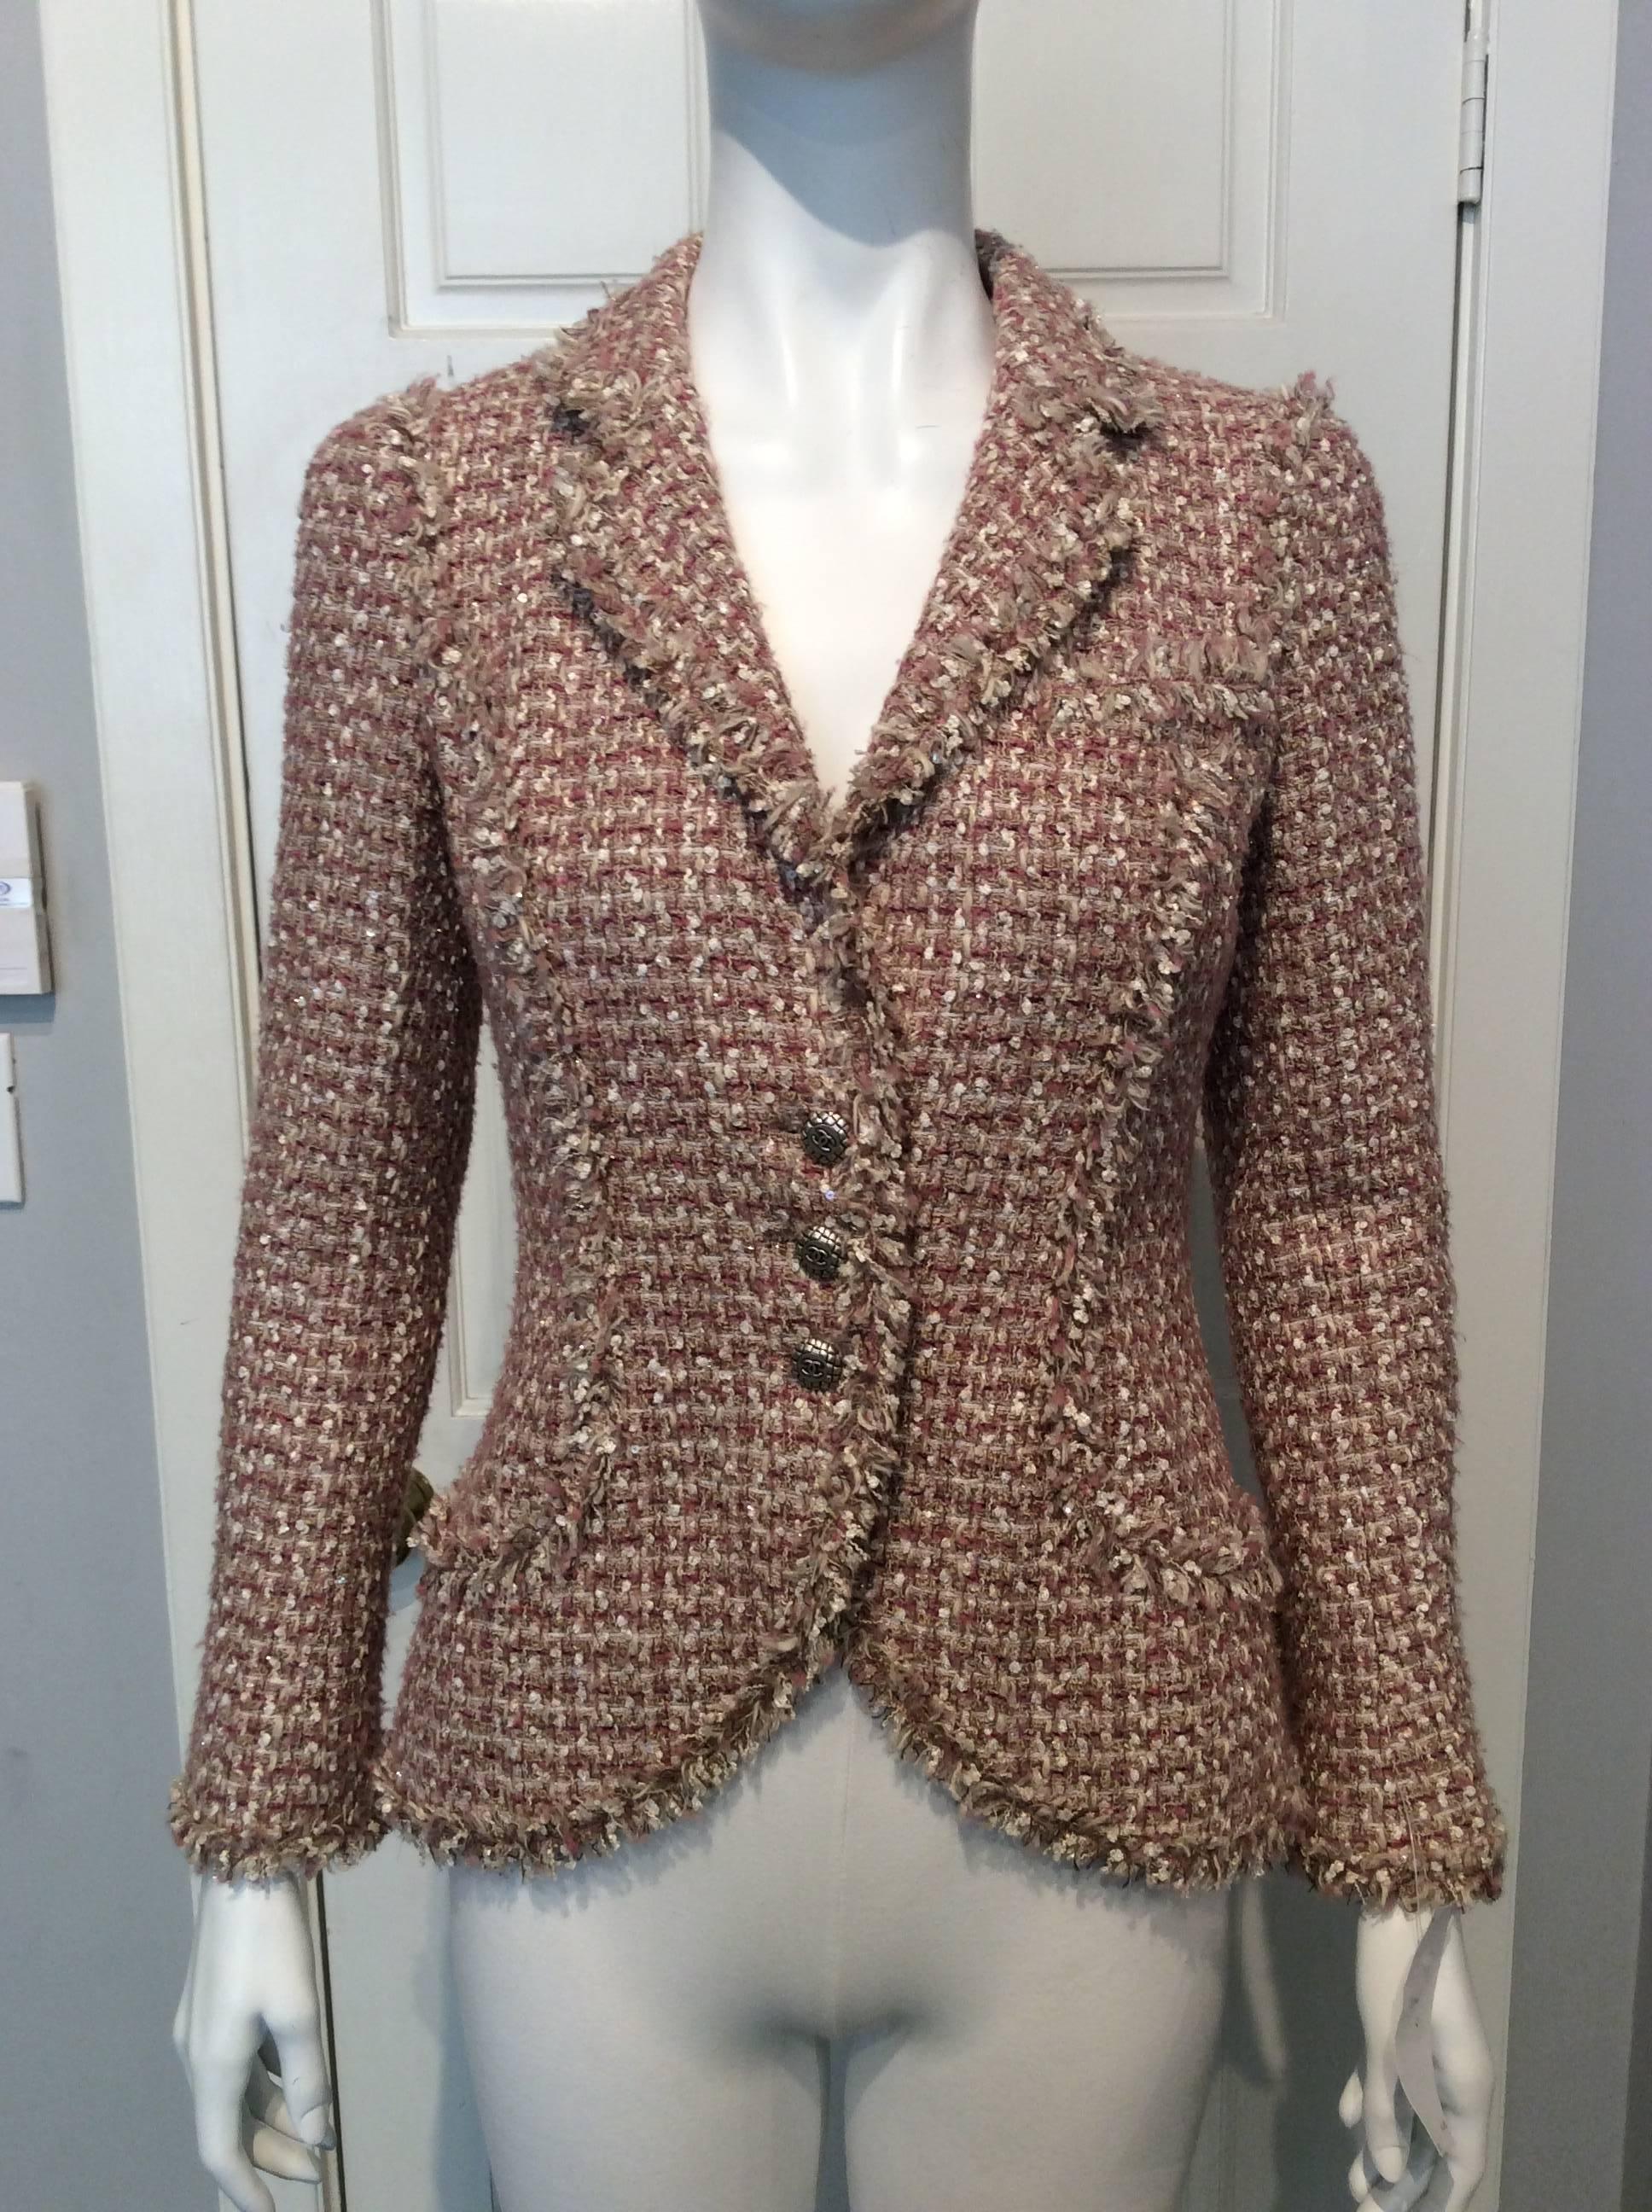 Fitted, hip length jacket in beige, ivory and rose tweed. All seams are trimmed with a fringe in the same fabric. The one breast pocket and two hip pockets are still unopened. Lined in light pink silk in the iconic camellia weave. Three silver